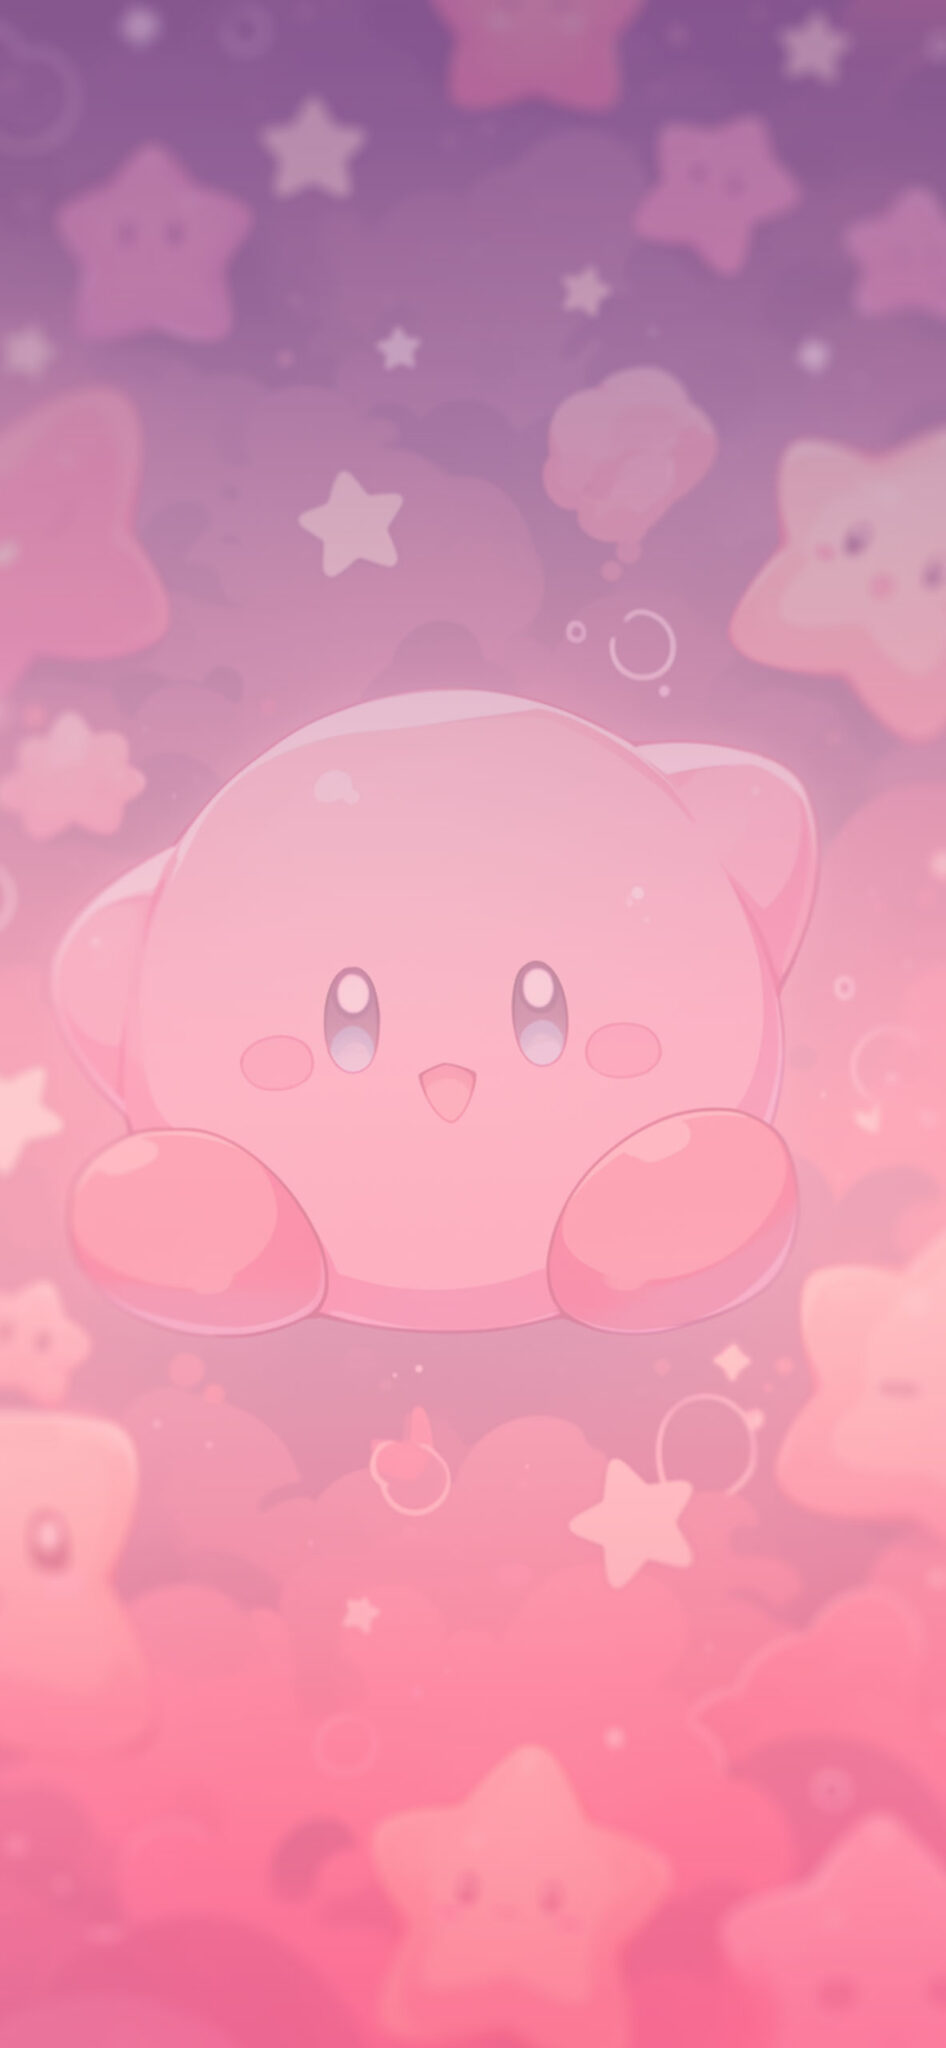 Kirby & Stars Pattern Wallpapers - Cool Kirby Wallpapers for iPhone